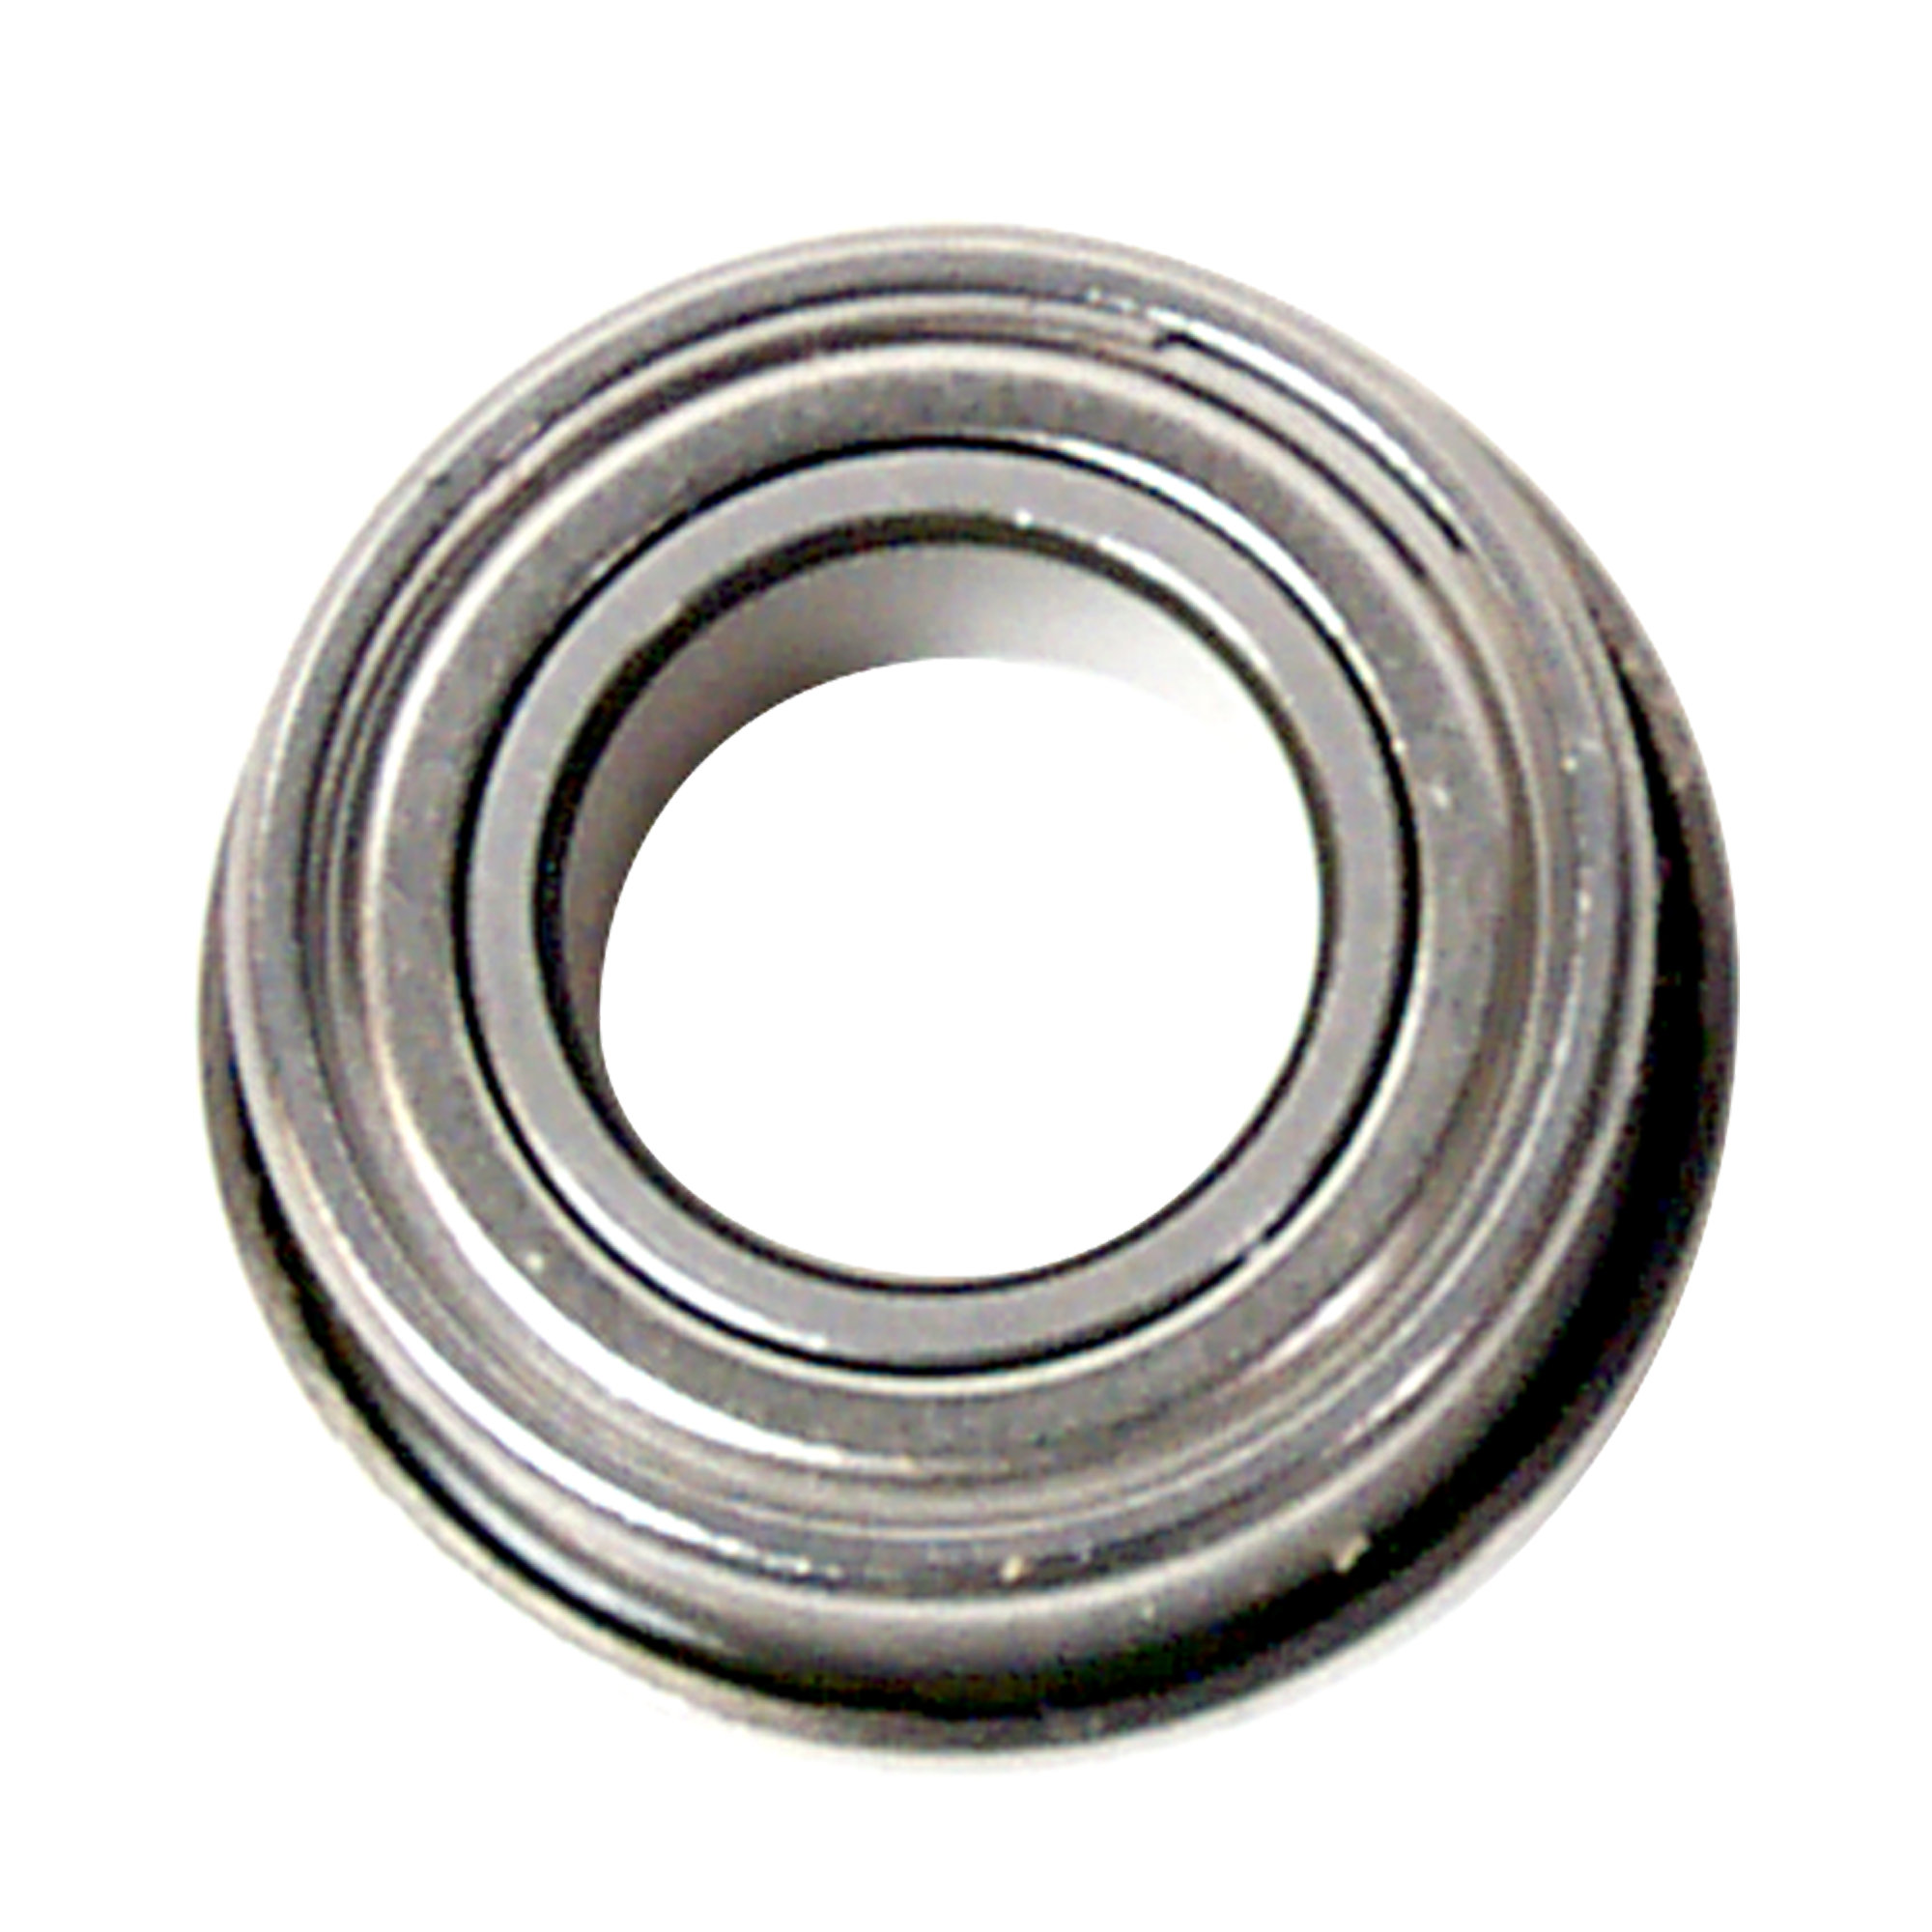 Small Bearing for Connecting Arm, Schwinn